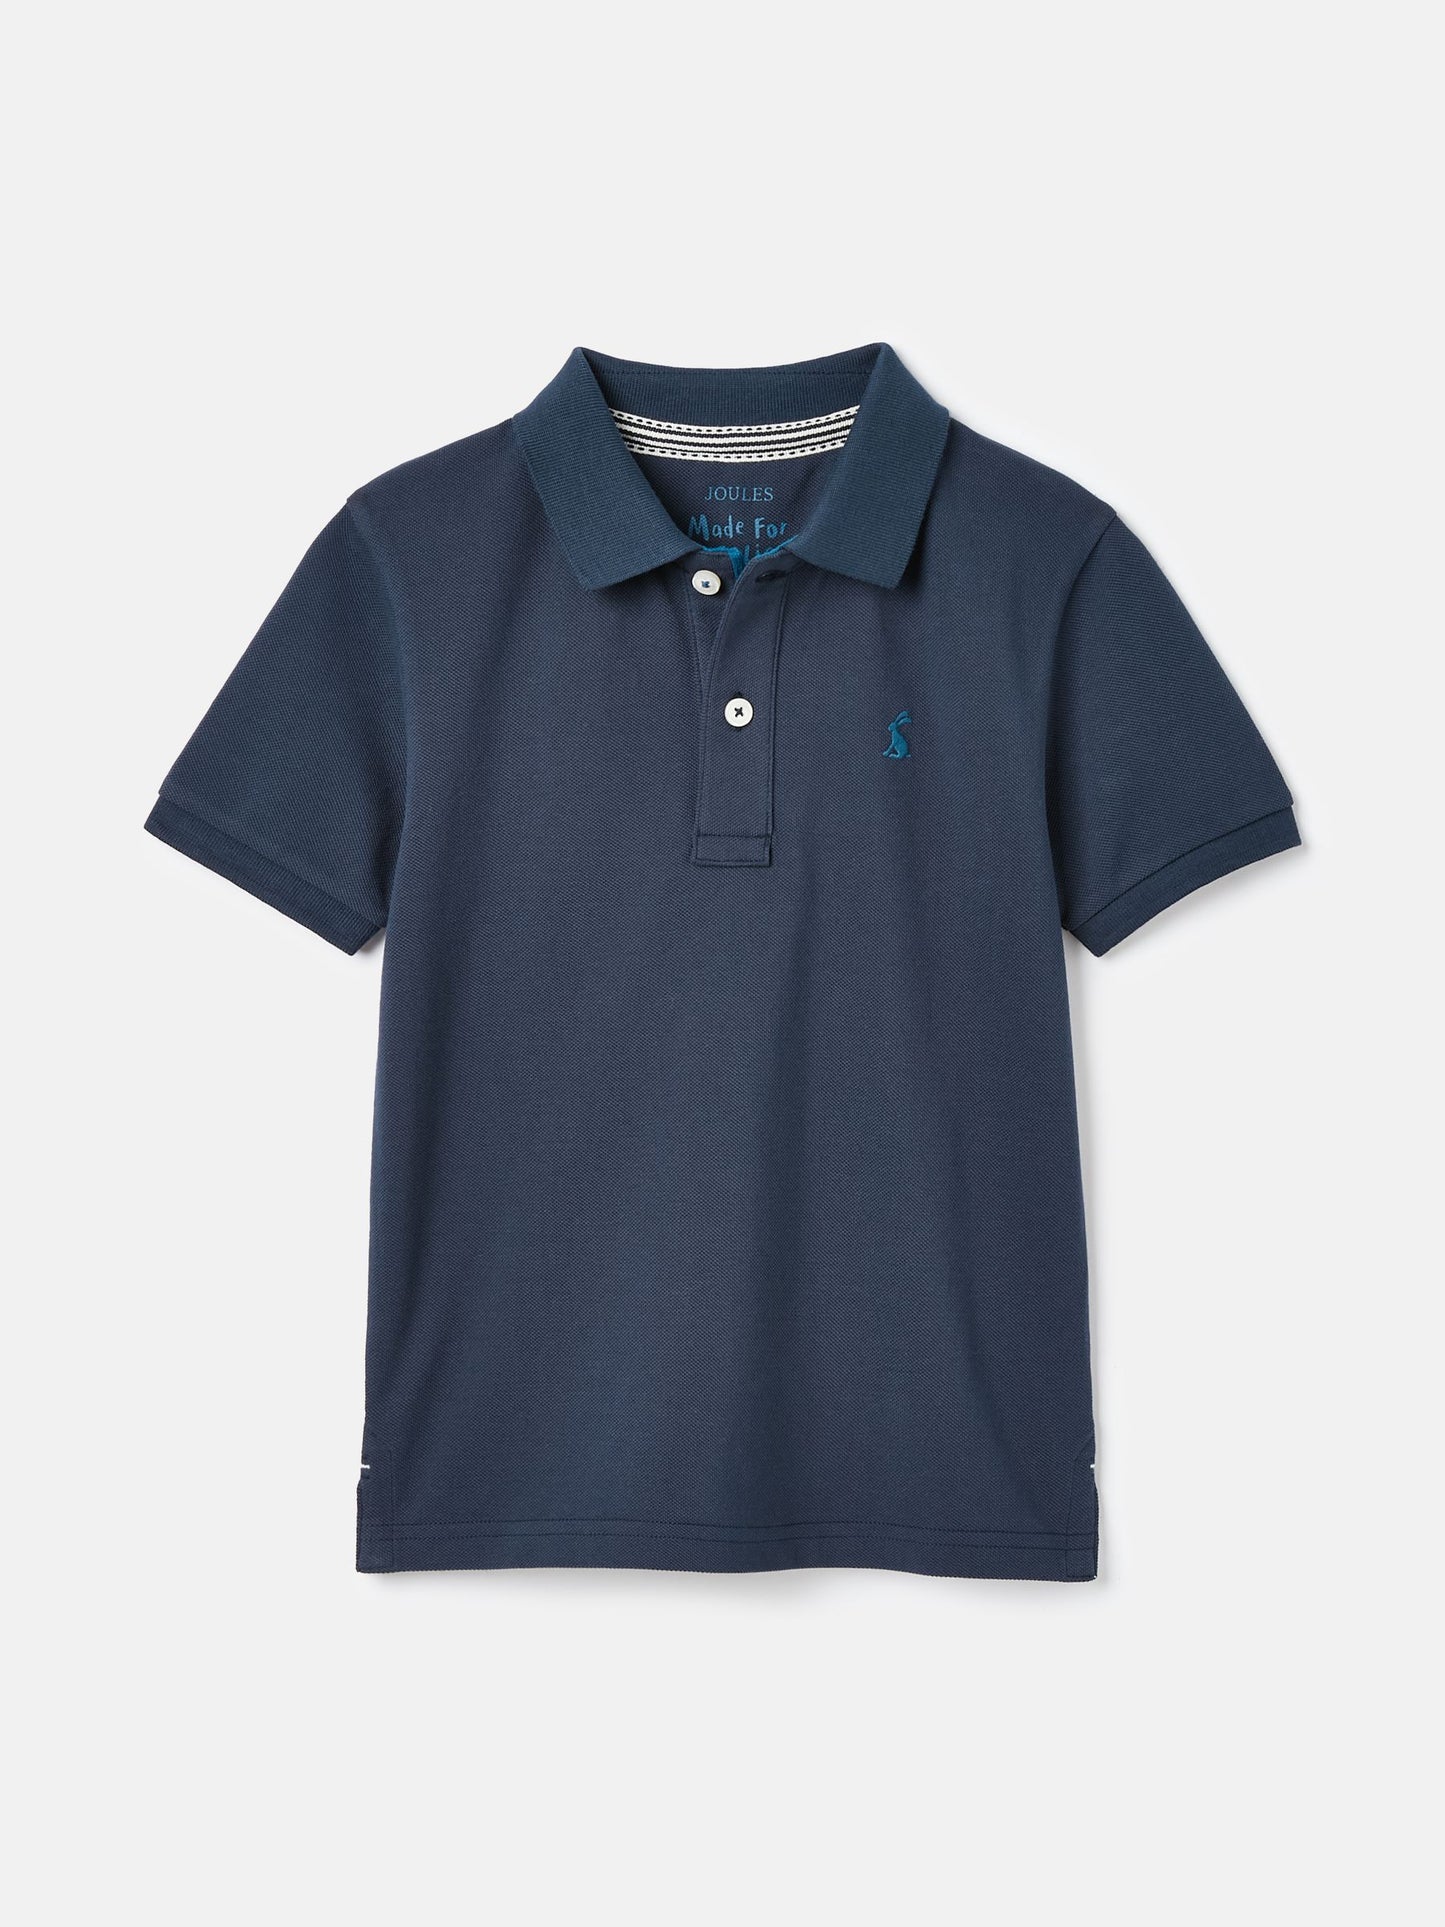 Joules Boys Woody Polo Shirt